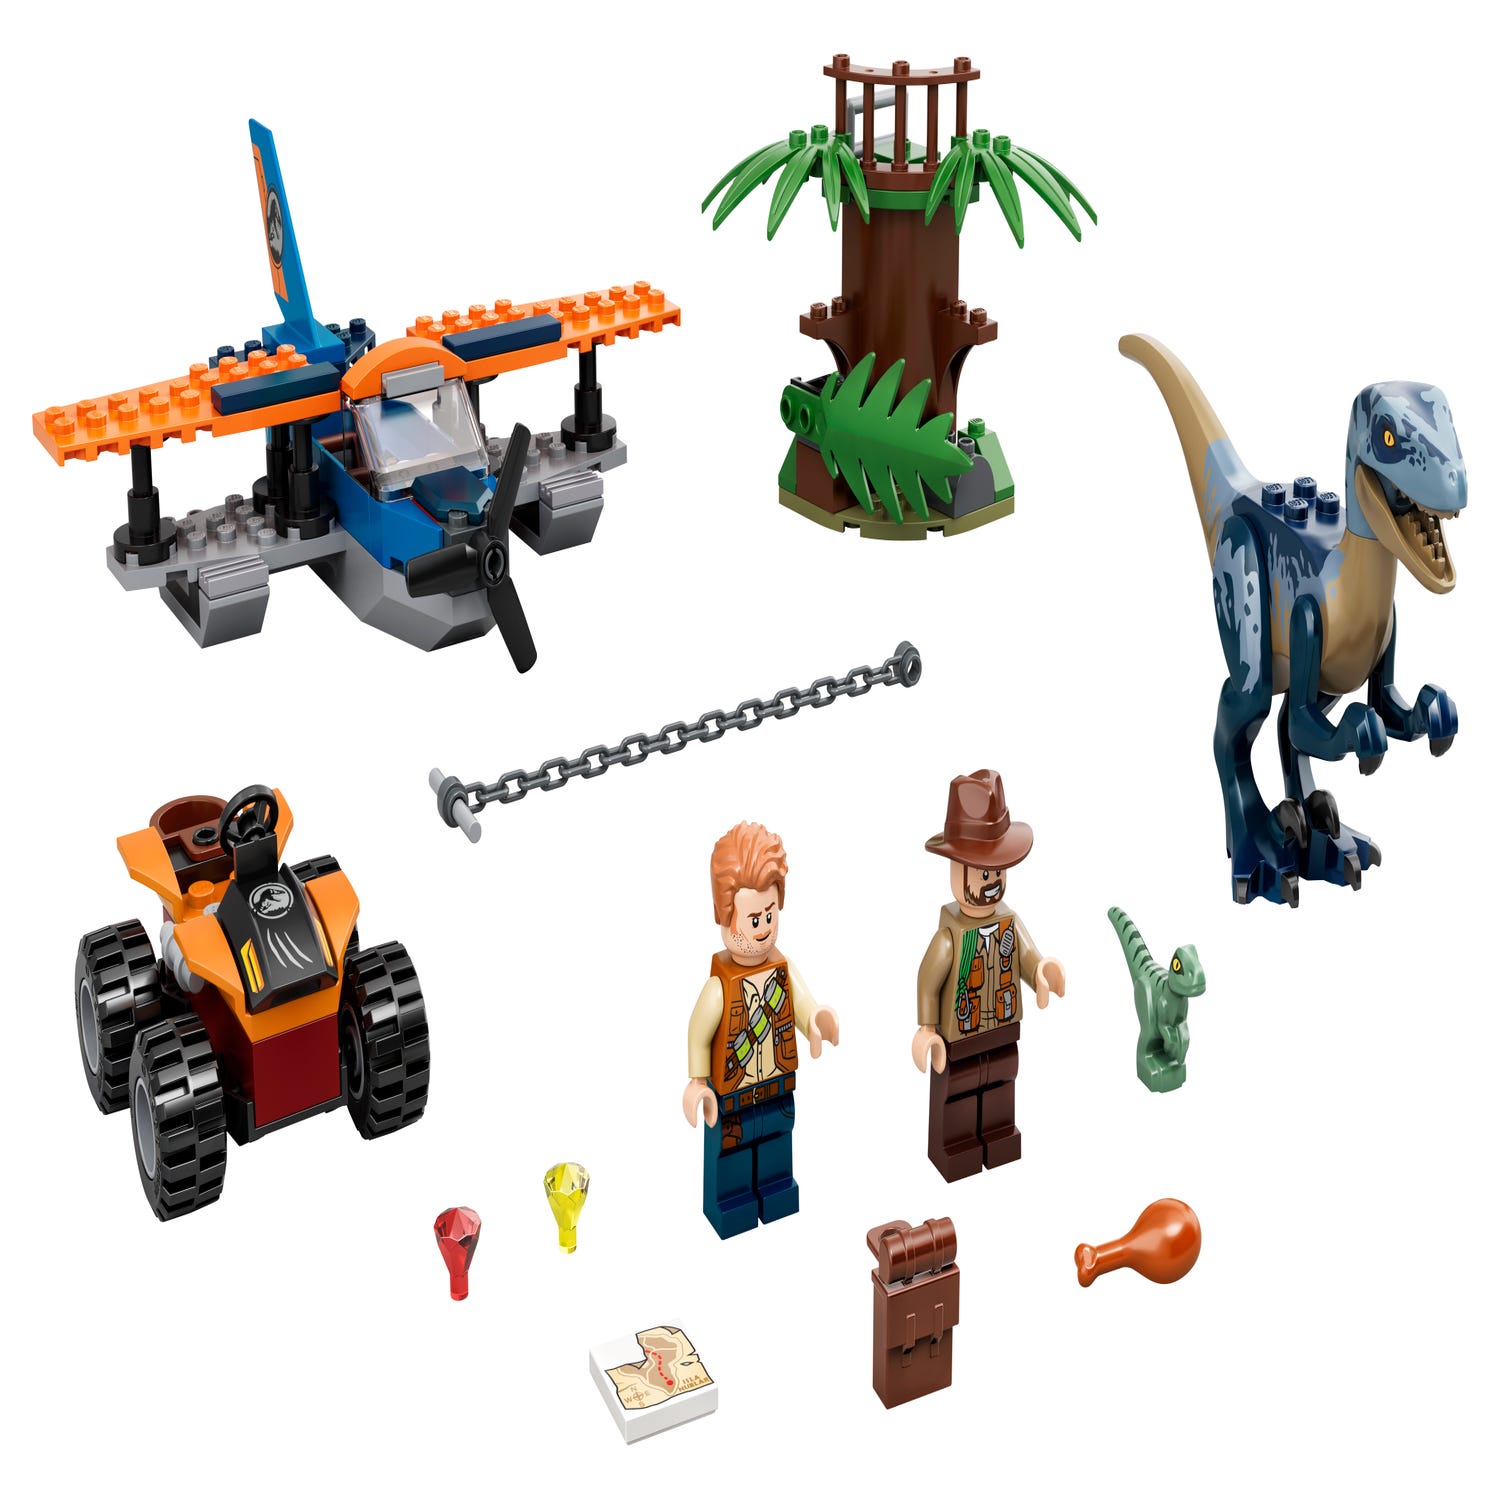 Velociraptor Biplane Rescue Mission 75942 Jurassic World Buy Online At The Official Lego Shop Us